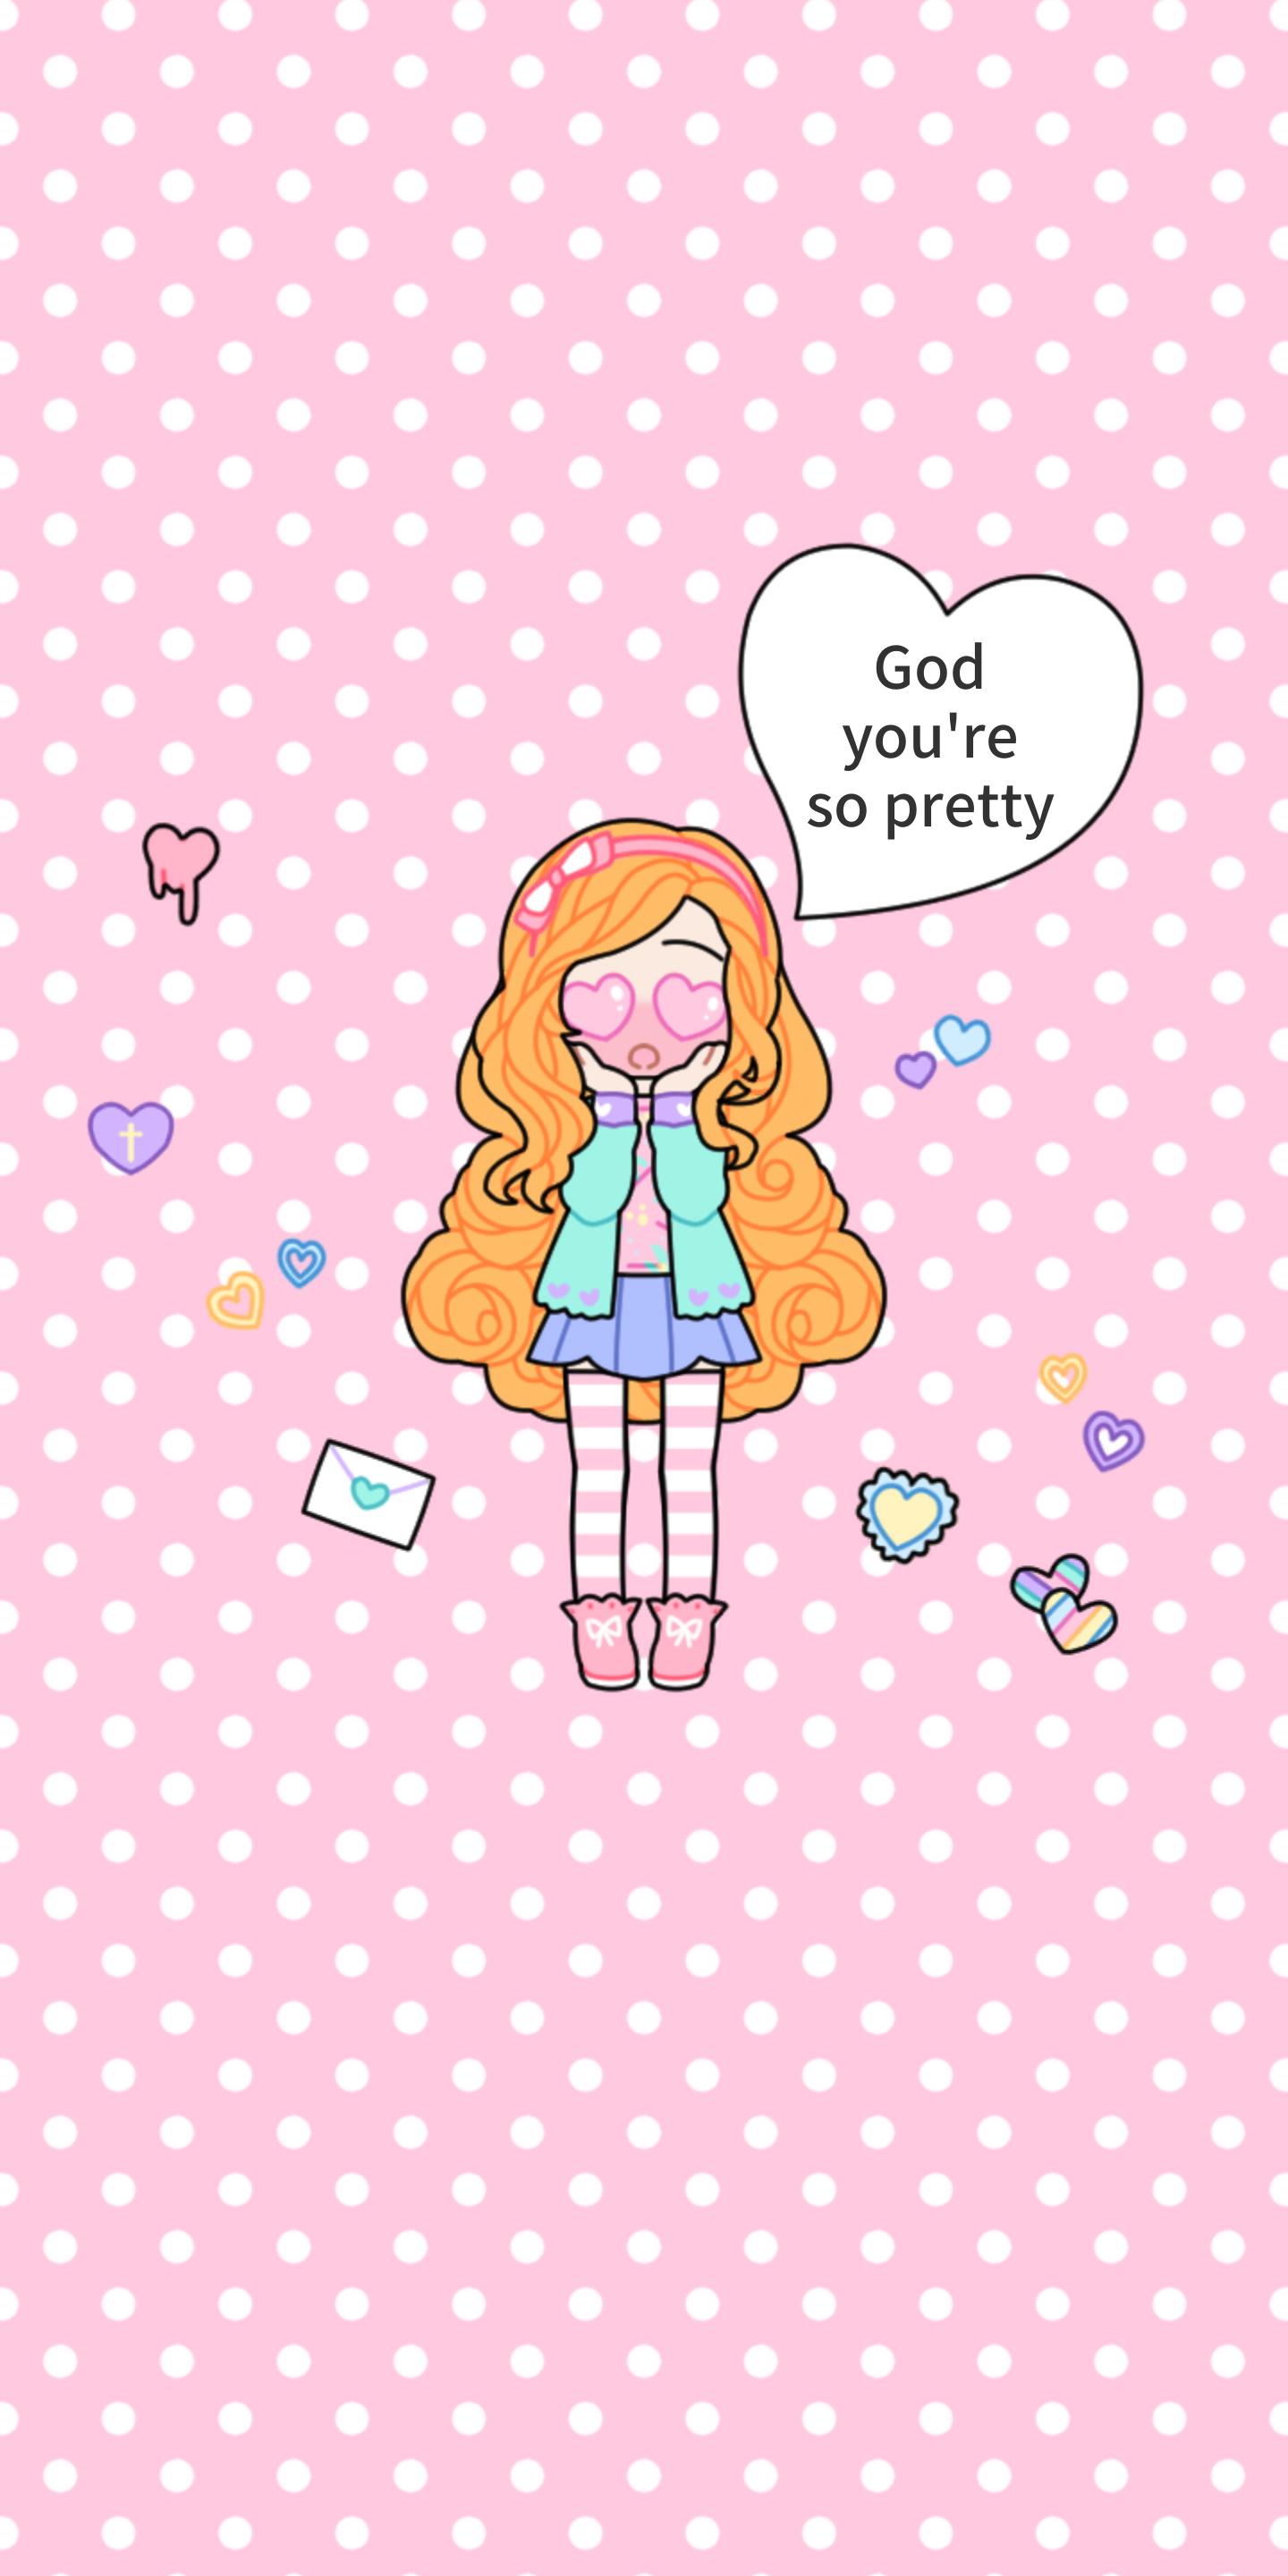 First time posting here! I made her as a cute positive wallpaper for my group chat